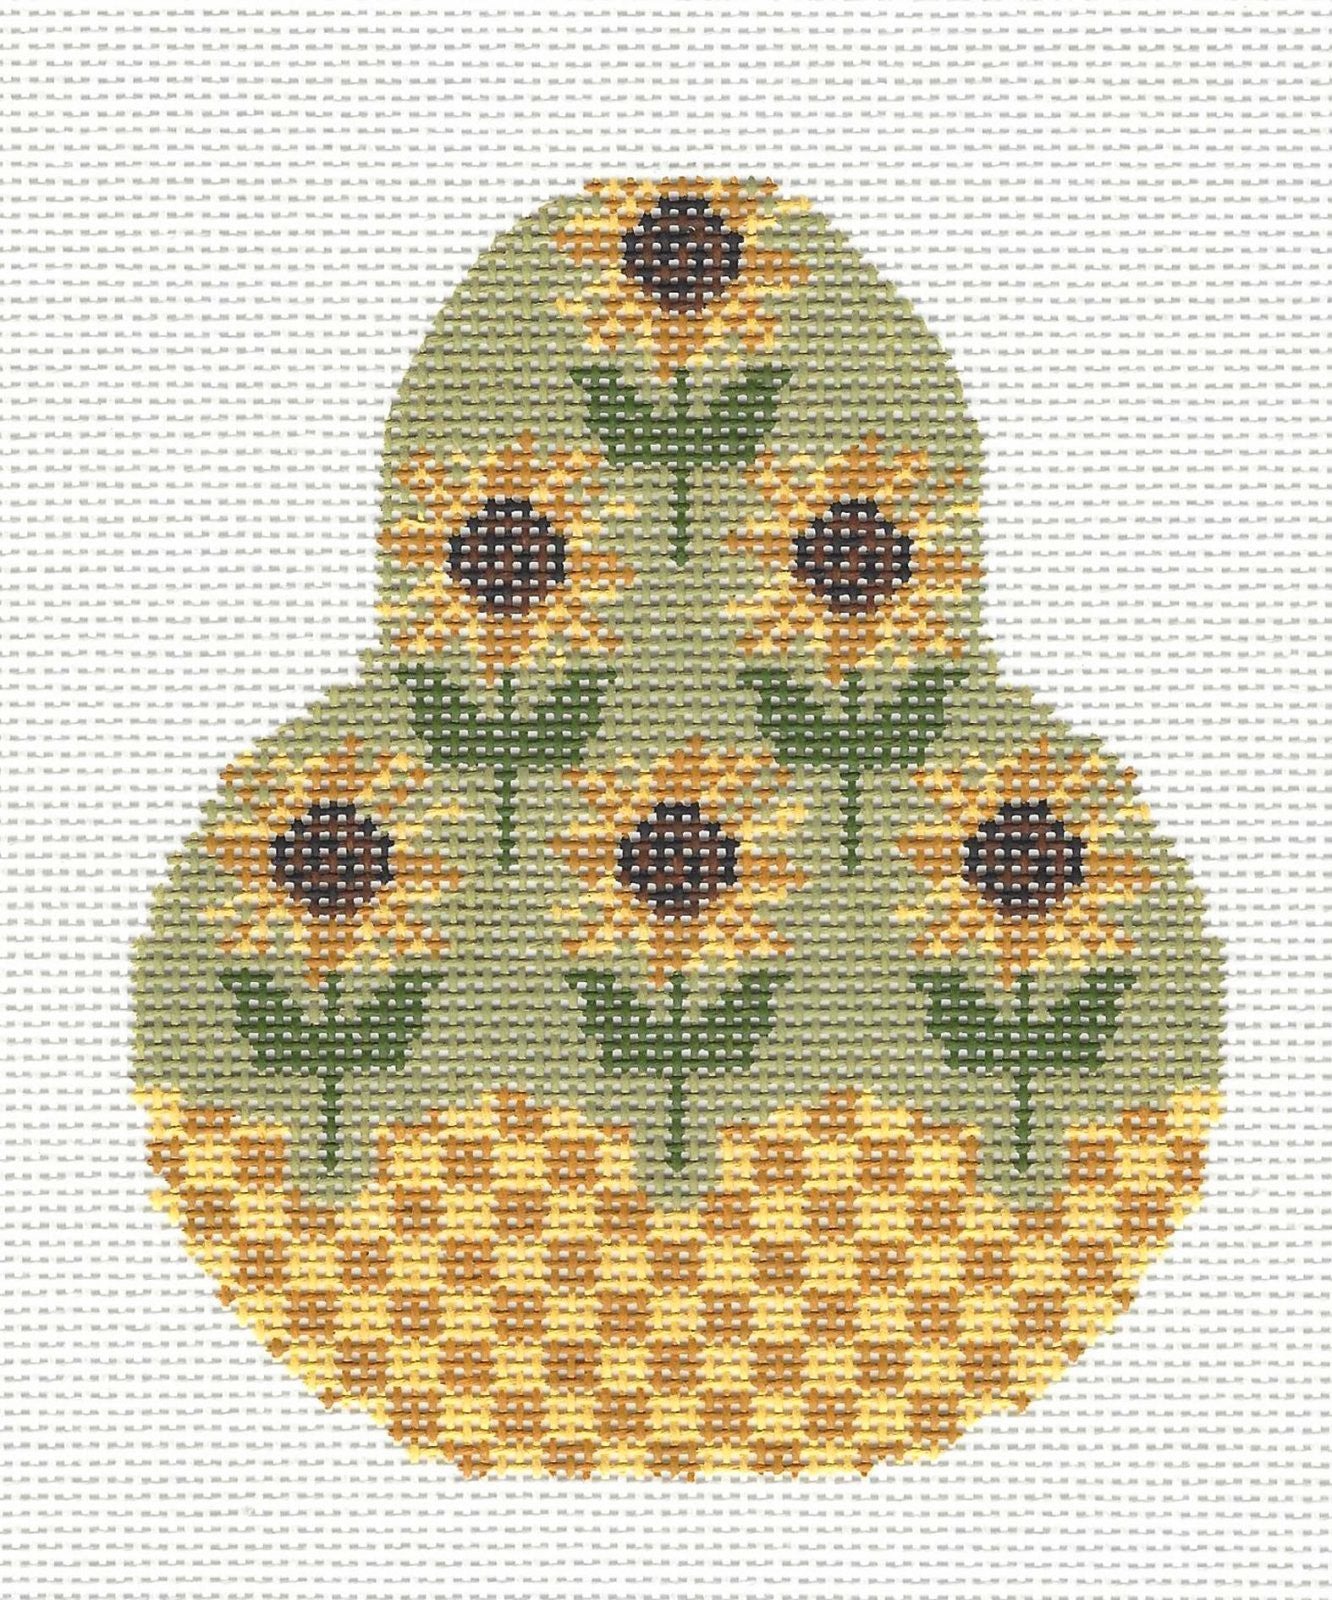 Kelly Clark Pear– Fall Sunflowers Pear Ornament handpainted Needlepoint Canvas **SP. ORDER**